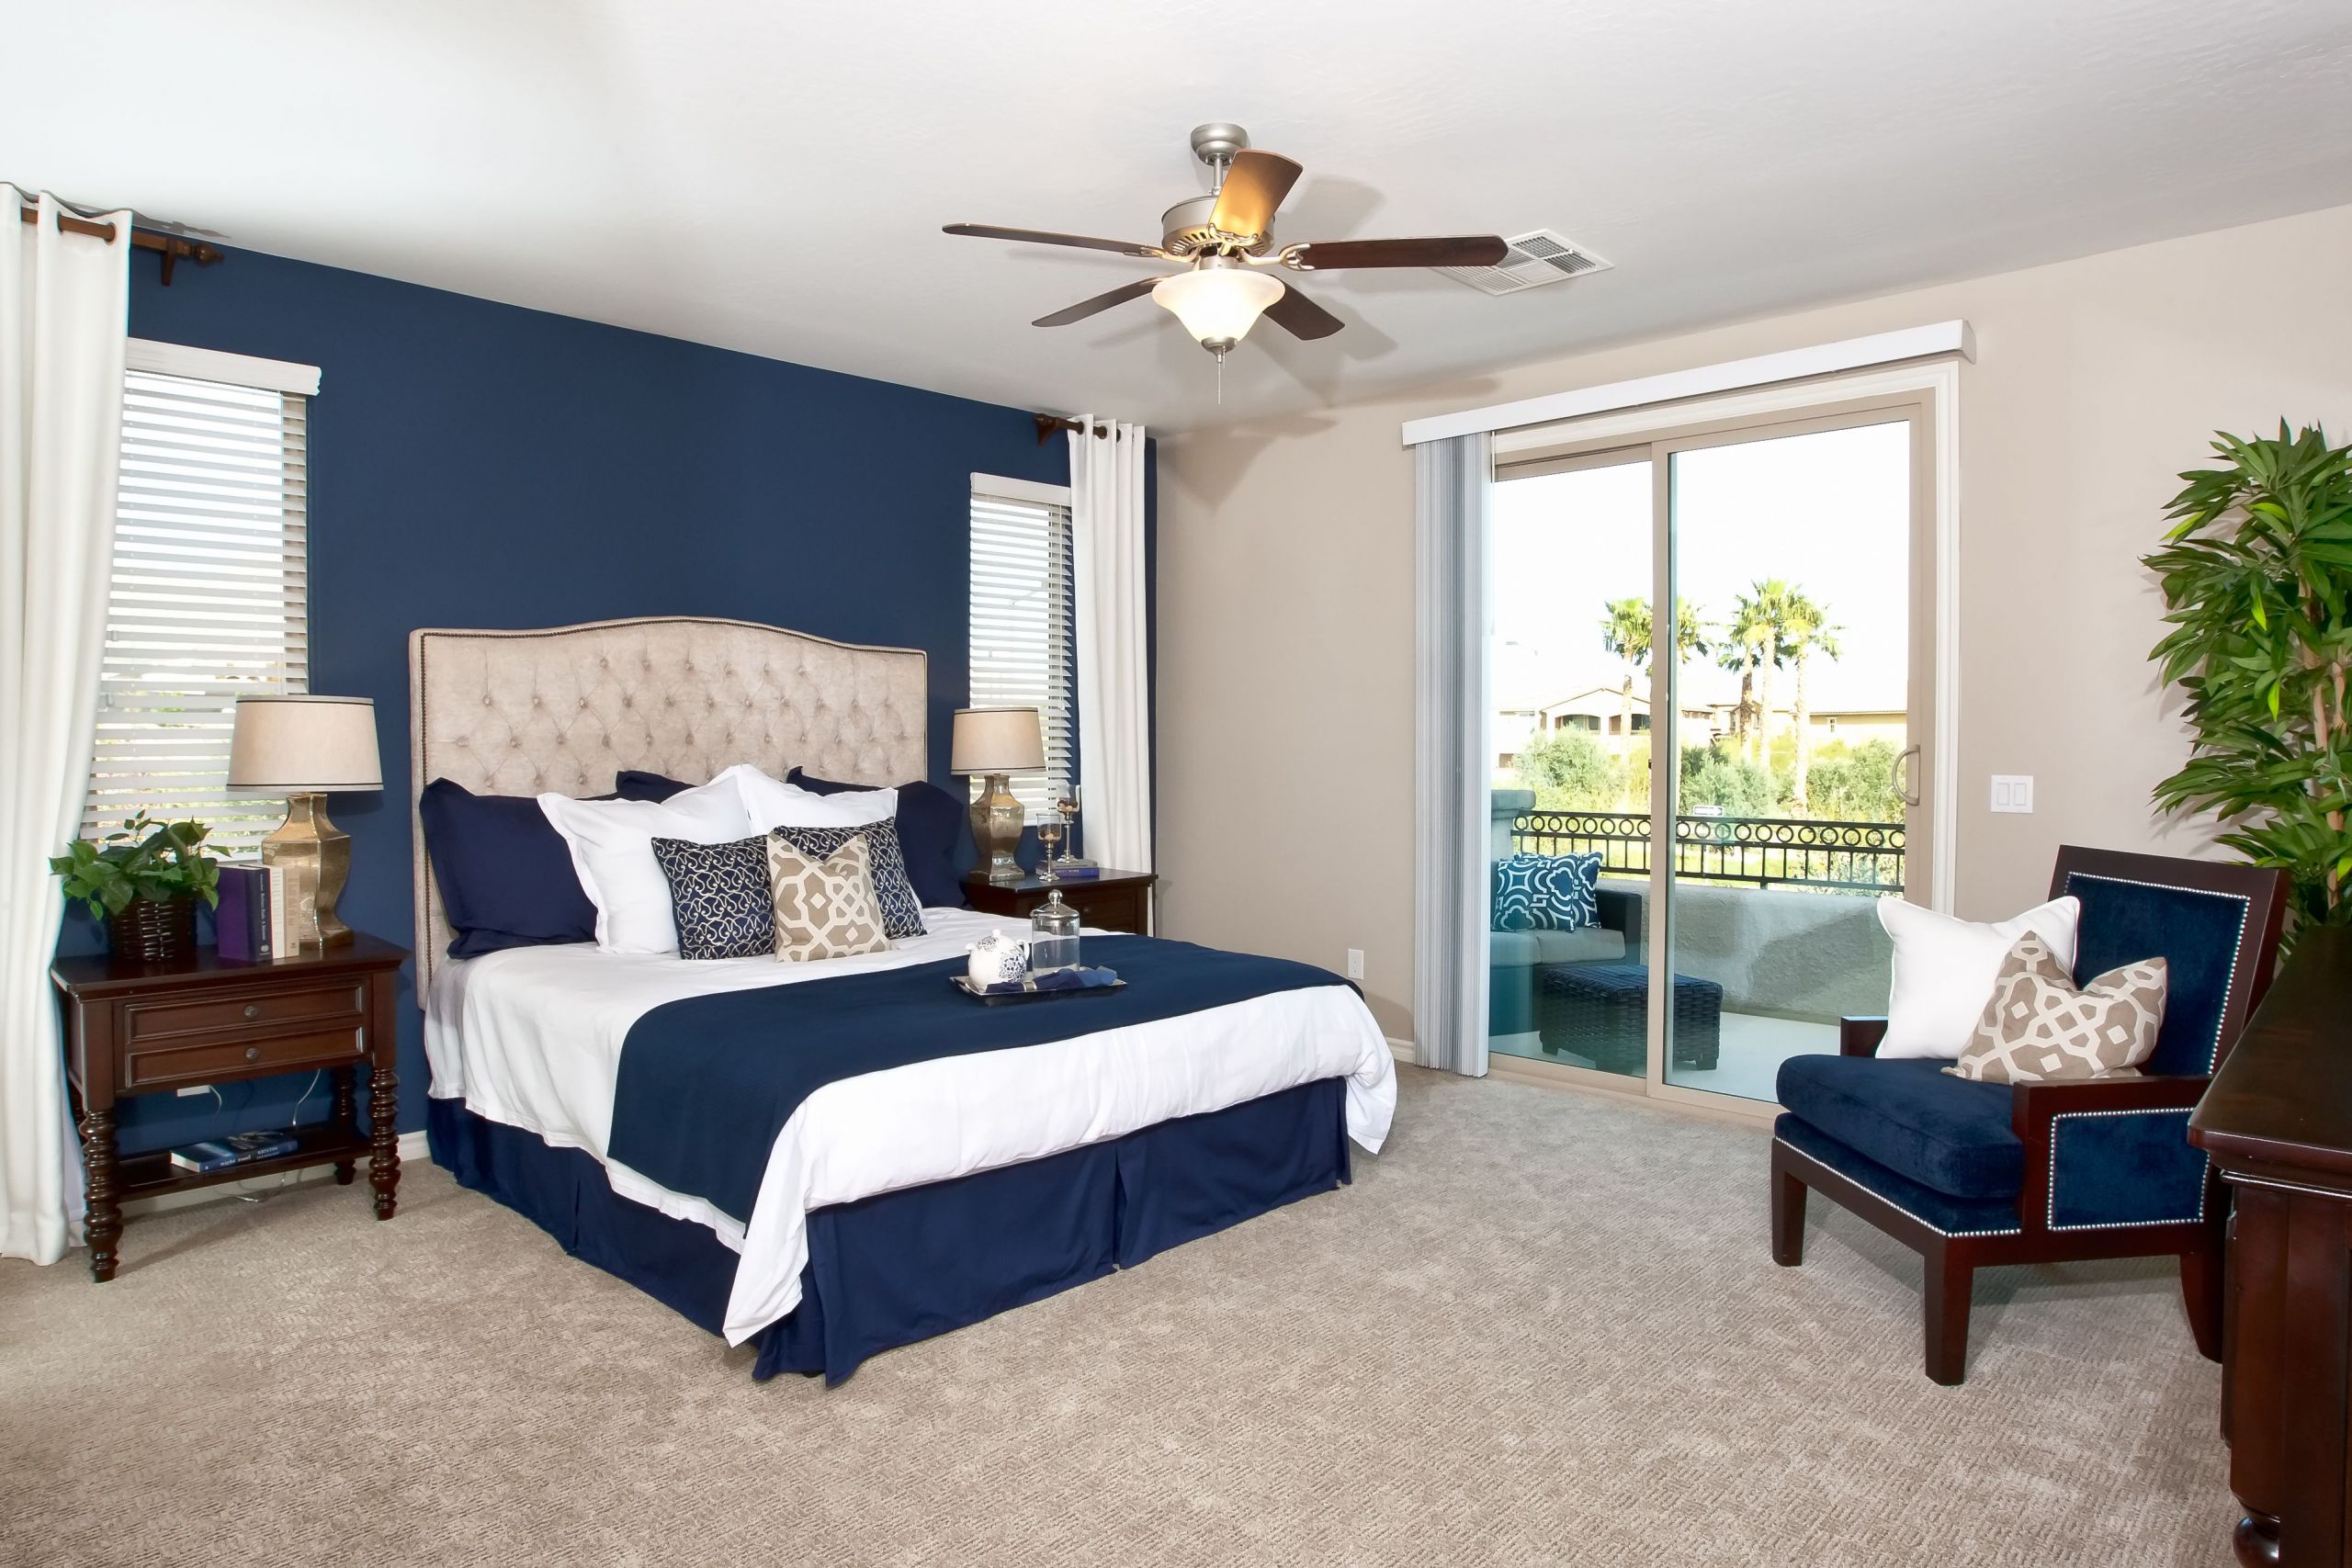 Nautical Bedroom Decorating Ideas
 Like cool colors Check out this bedroom at our Catalina